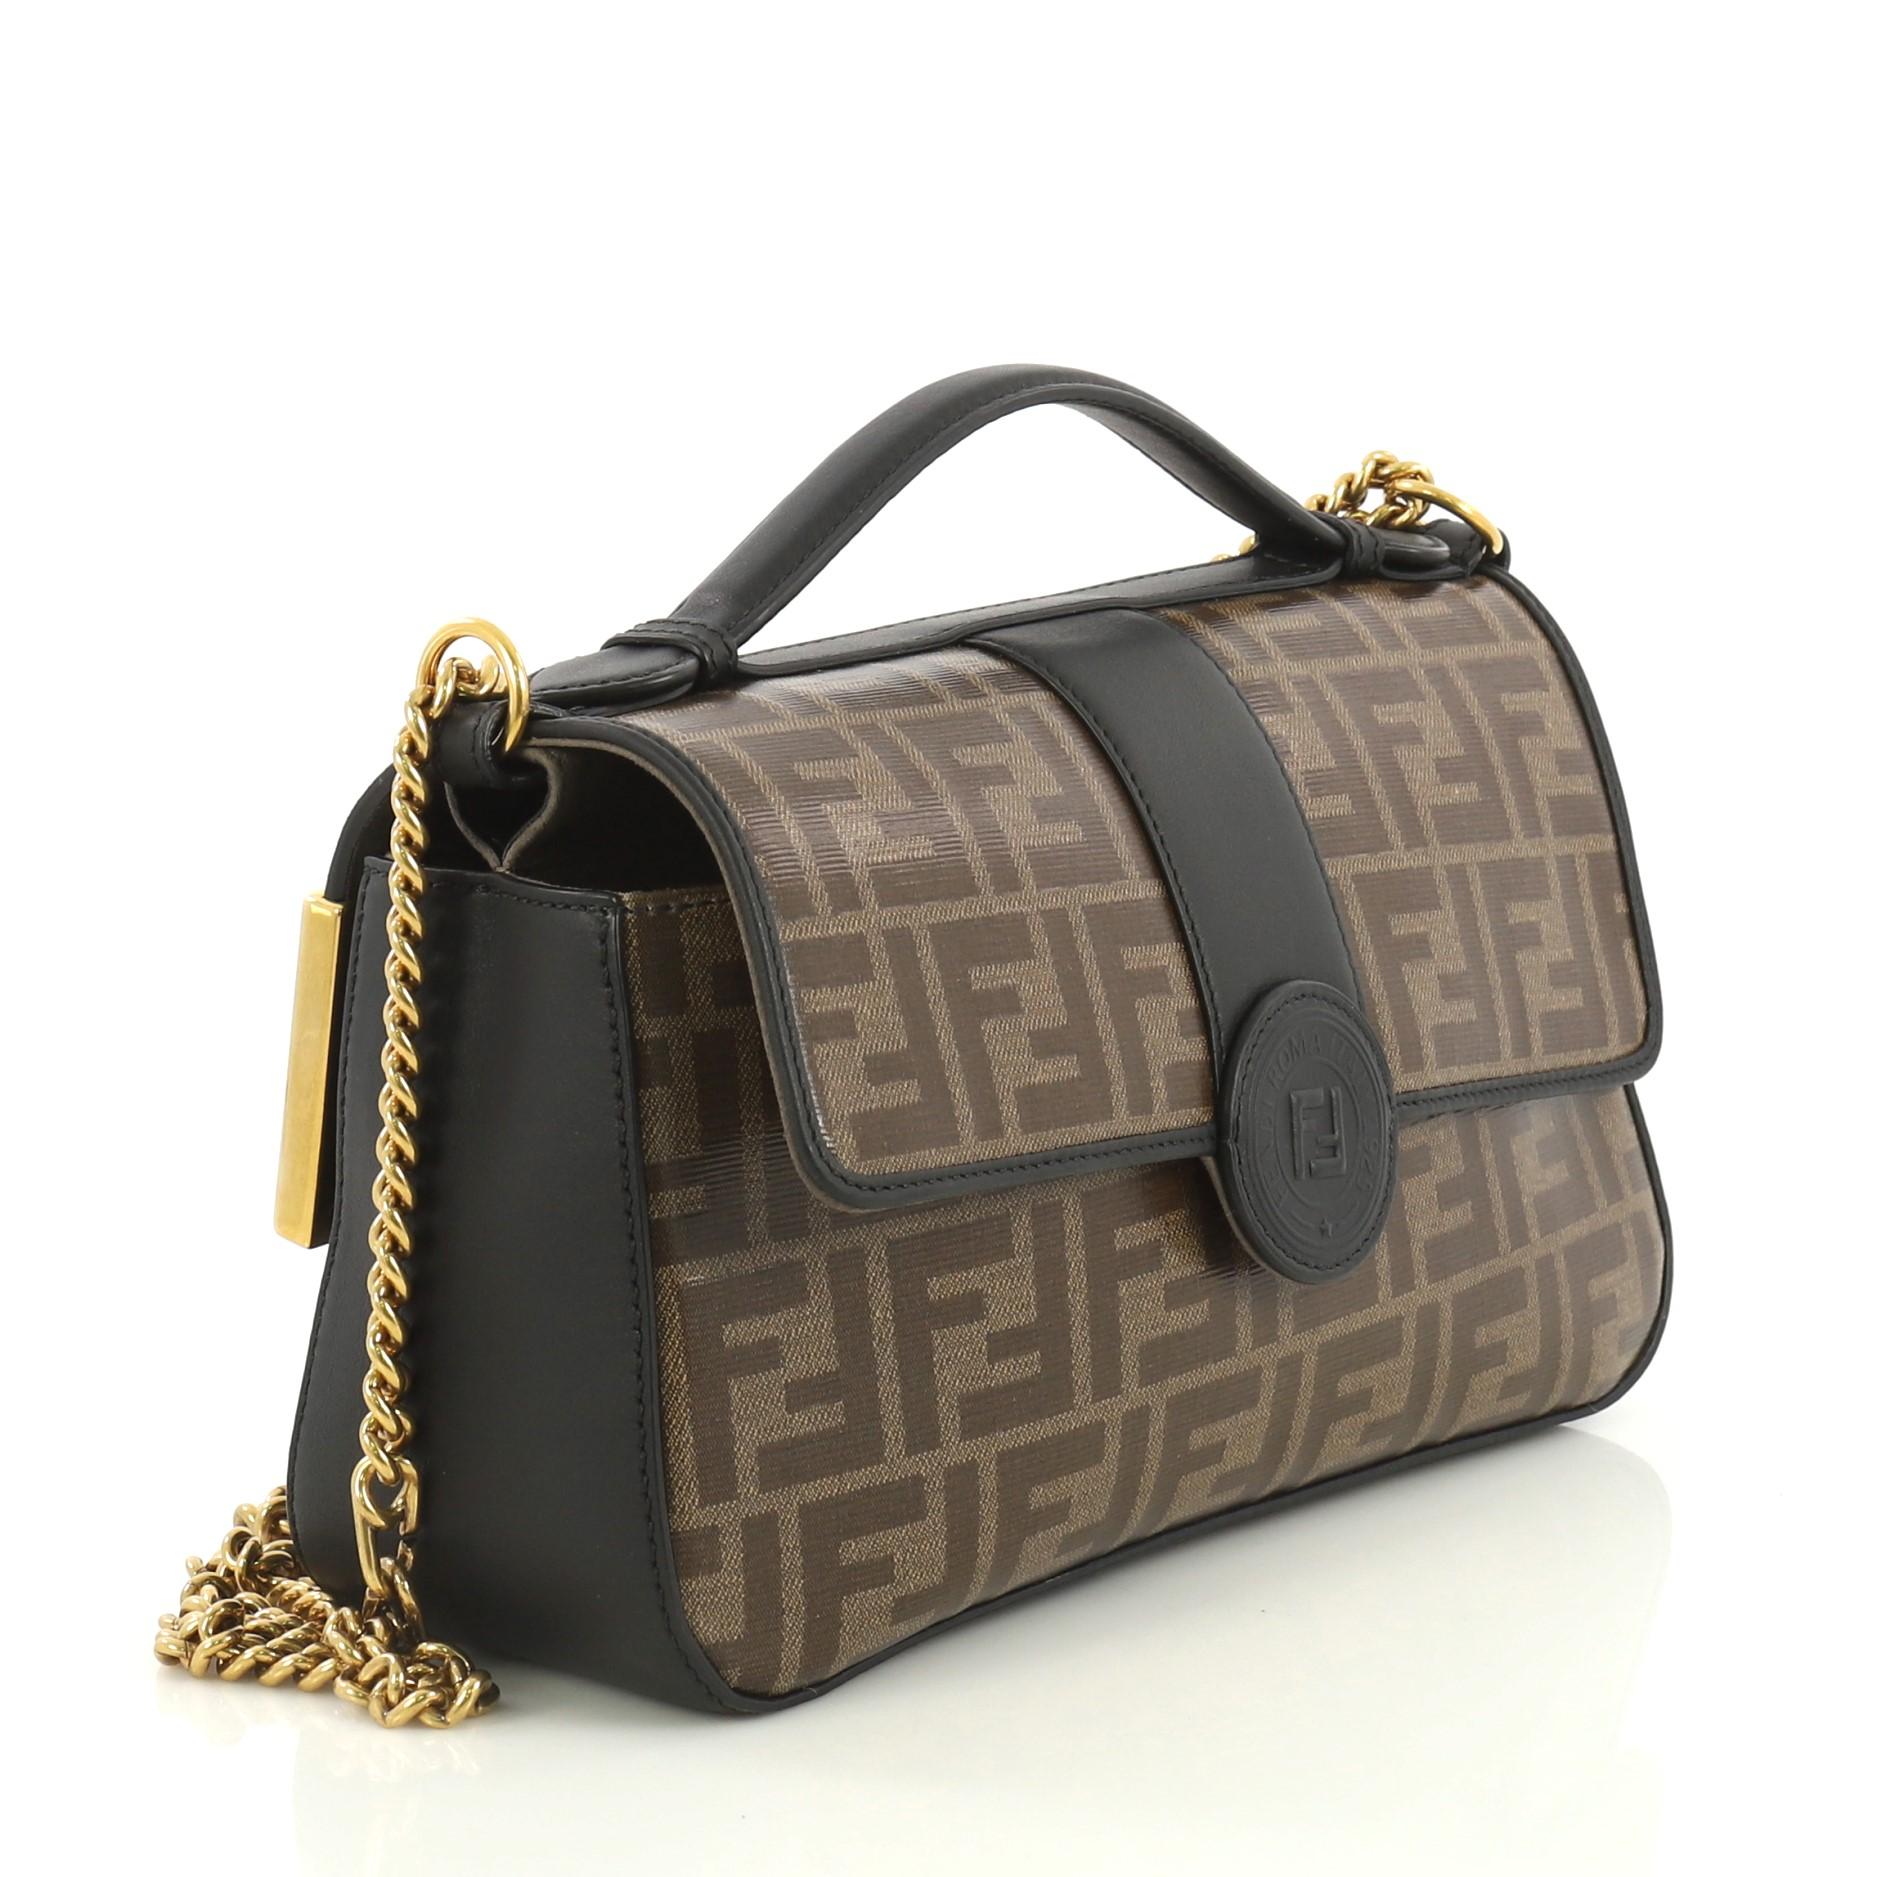 This Fendi 1974 Double F Flap Bag Zucca Coated Canvas and Leather Medium, crafted from black and brown zucca coated canvas and leather, features chain link strap, top handle, exterior back flap compartment, and gold-tone hardware. Its magnetic